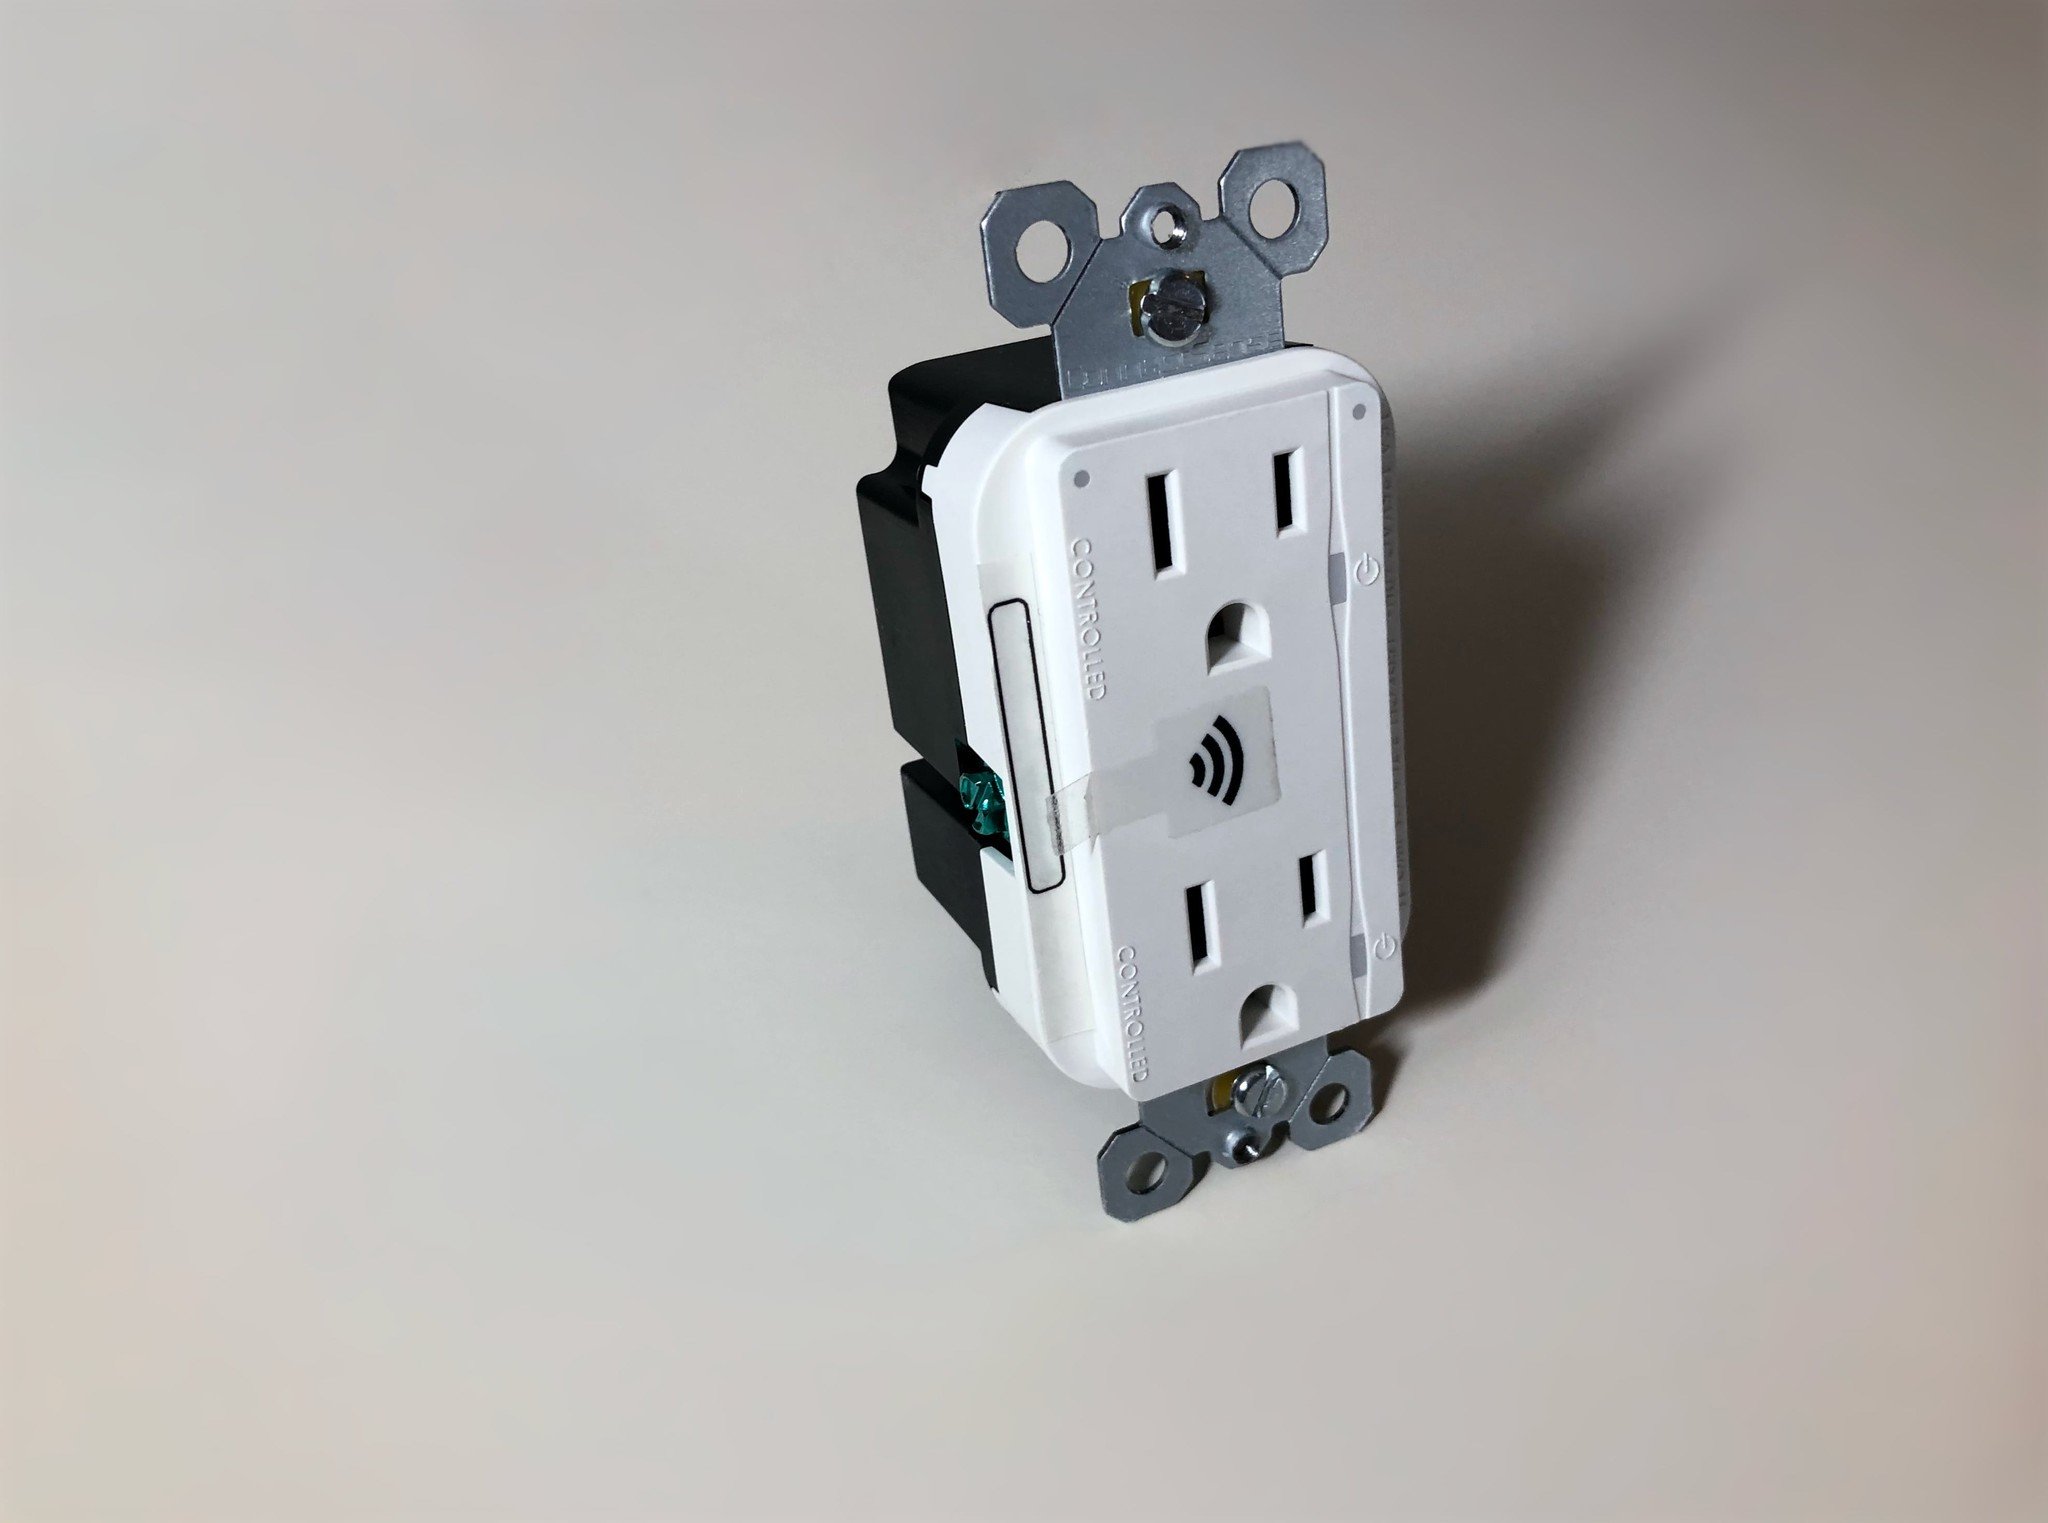 Connectsense Smart Inwall Outlet Front